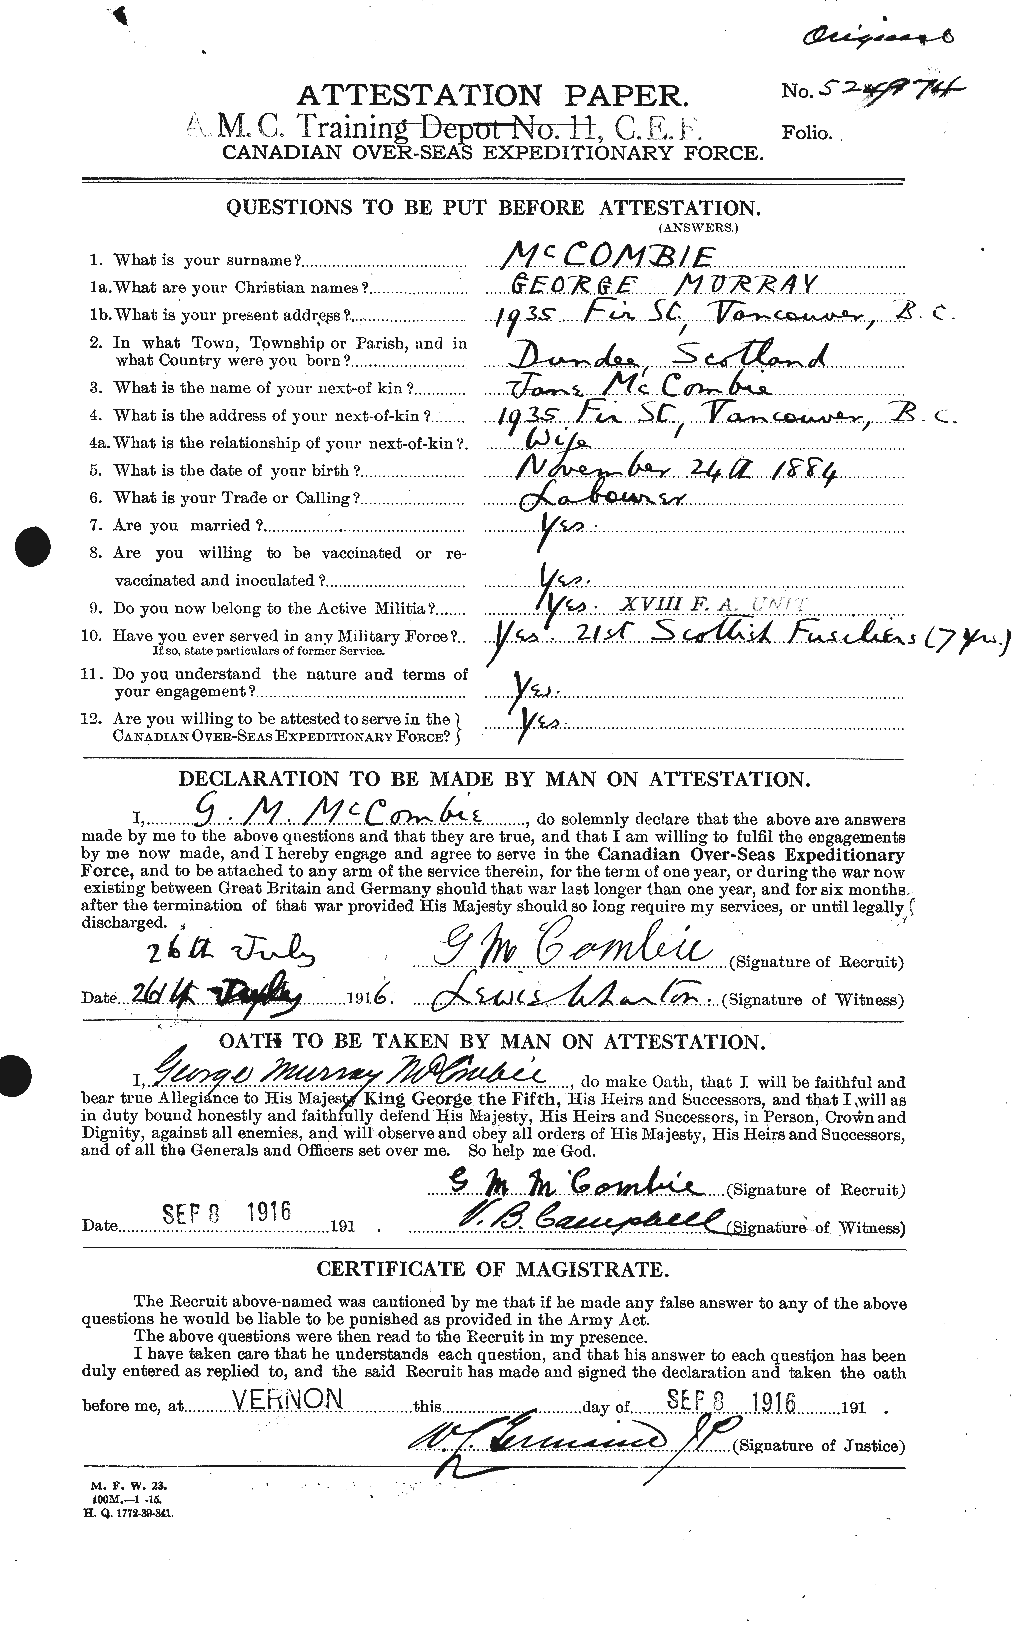 Personnel Records of the First World War - CEF 133089a